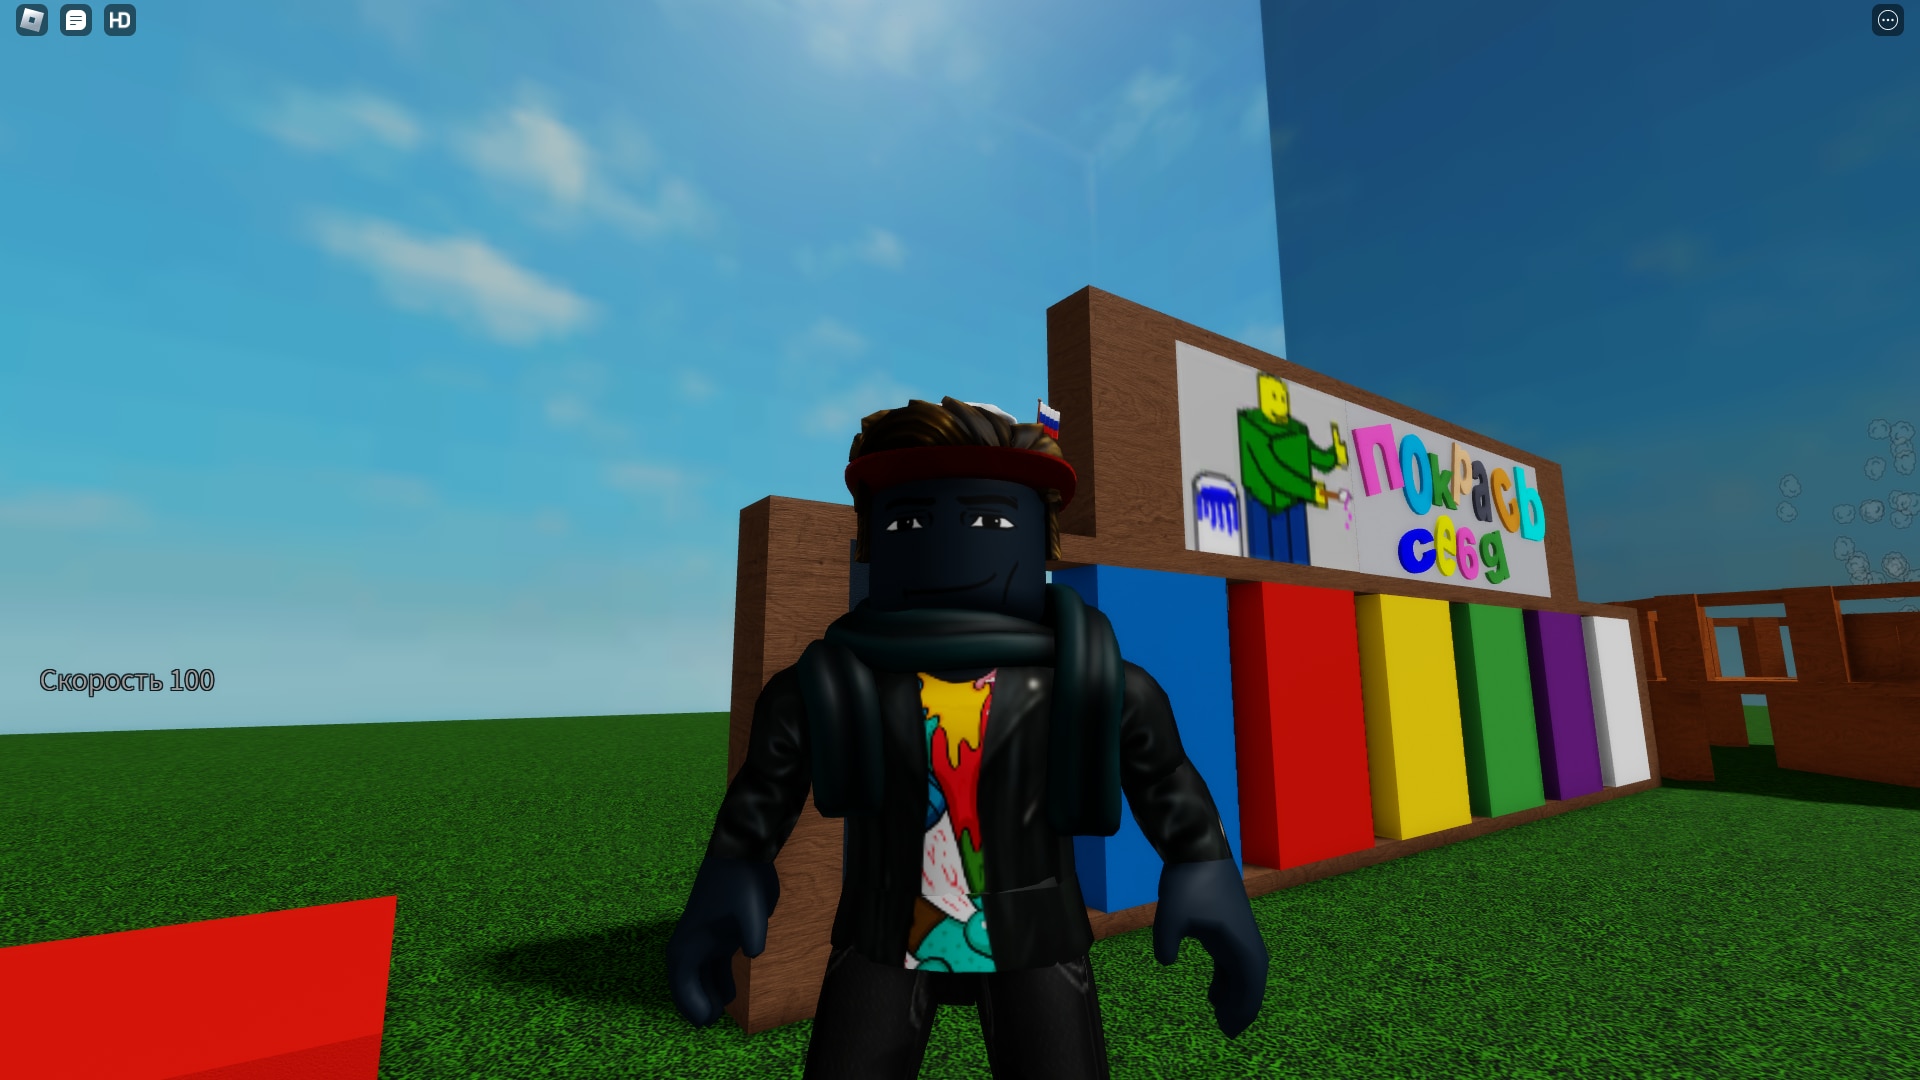 Roblox Noob, Ready for Combat (Light variant)